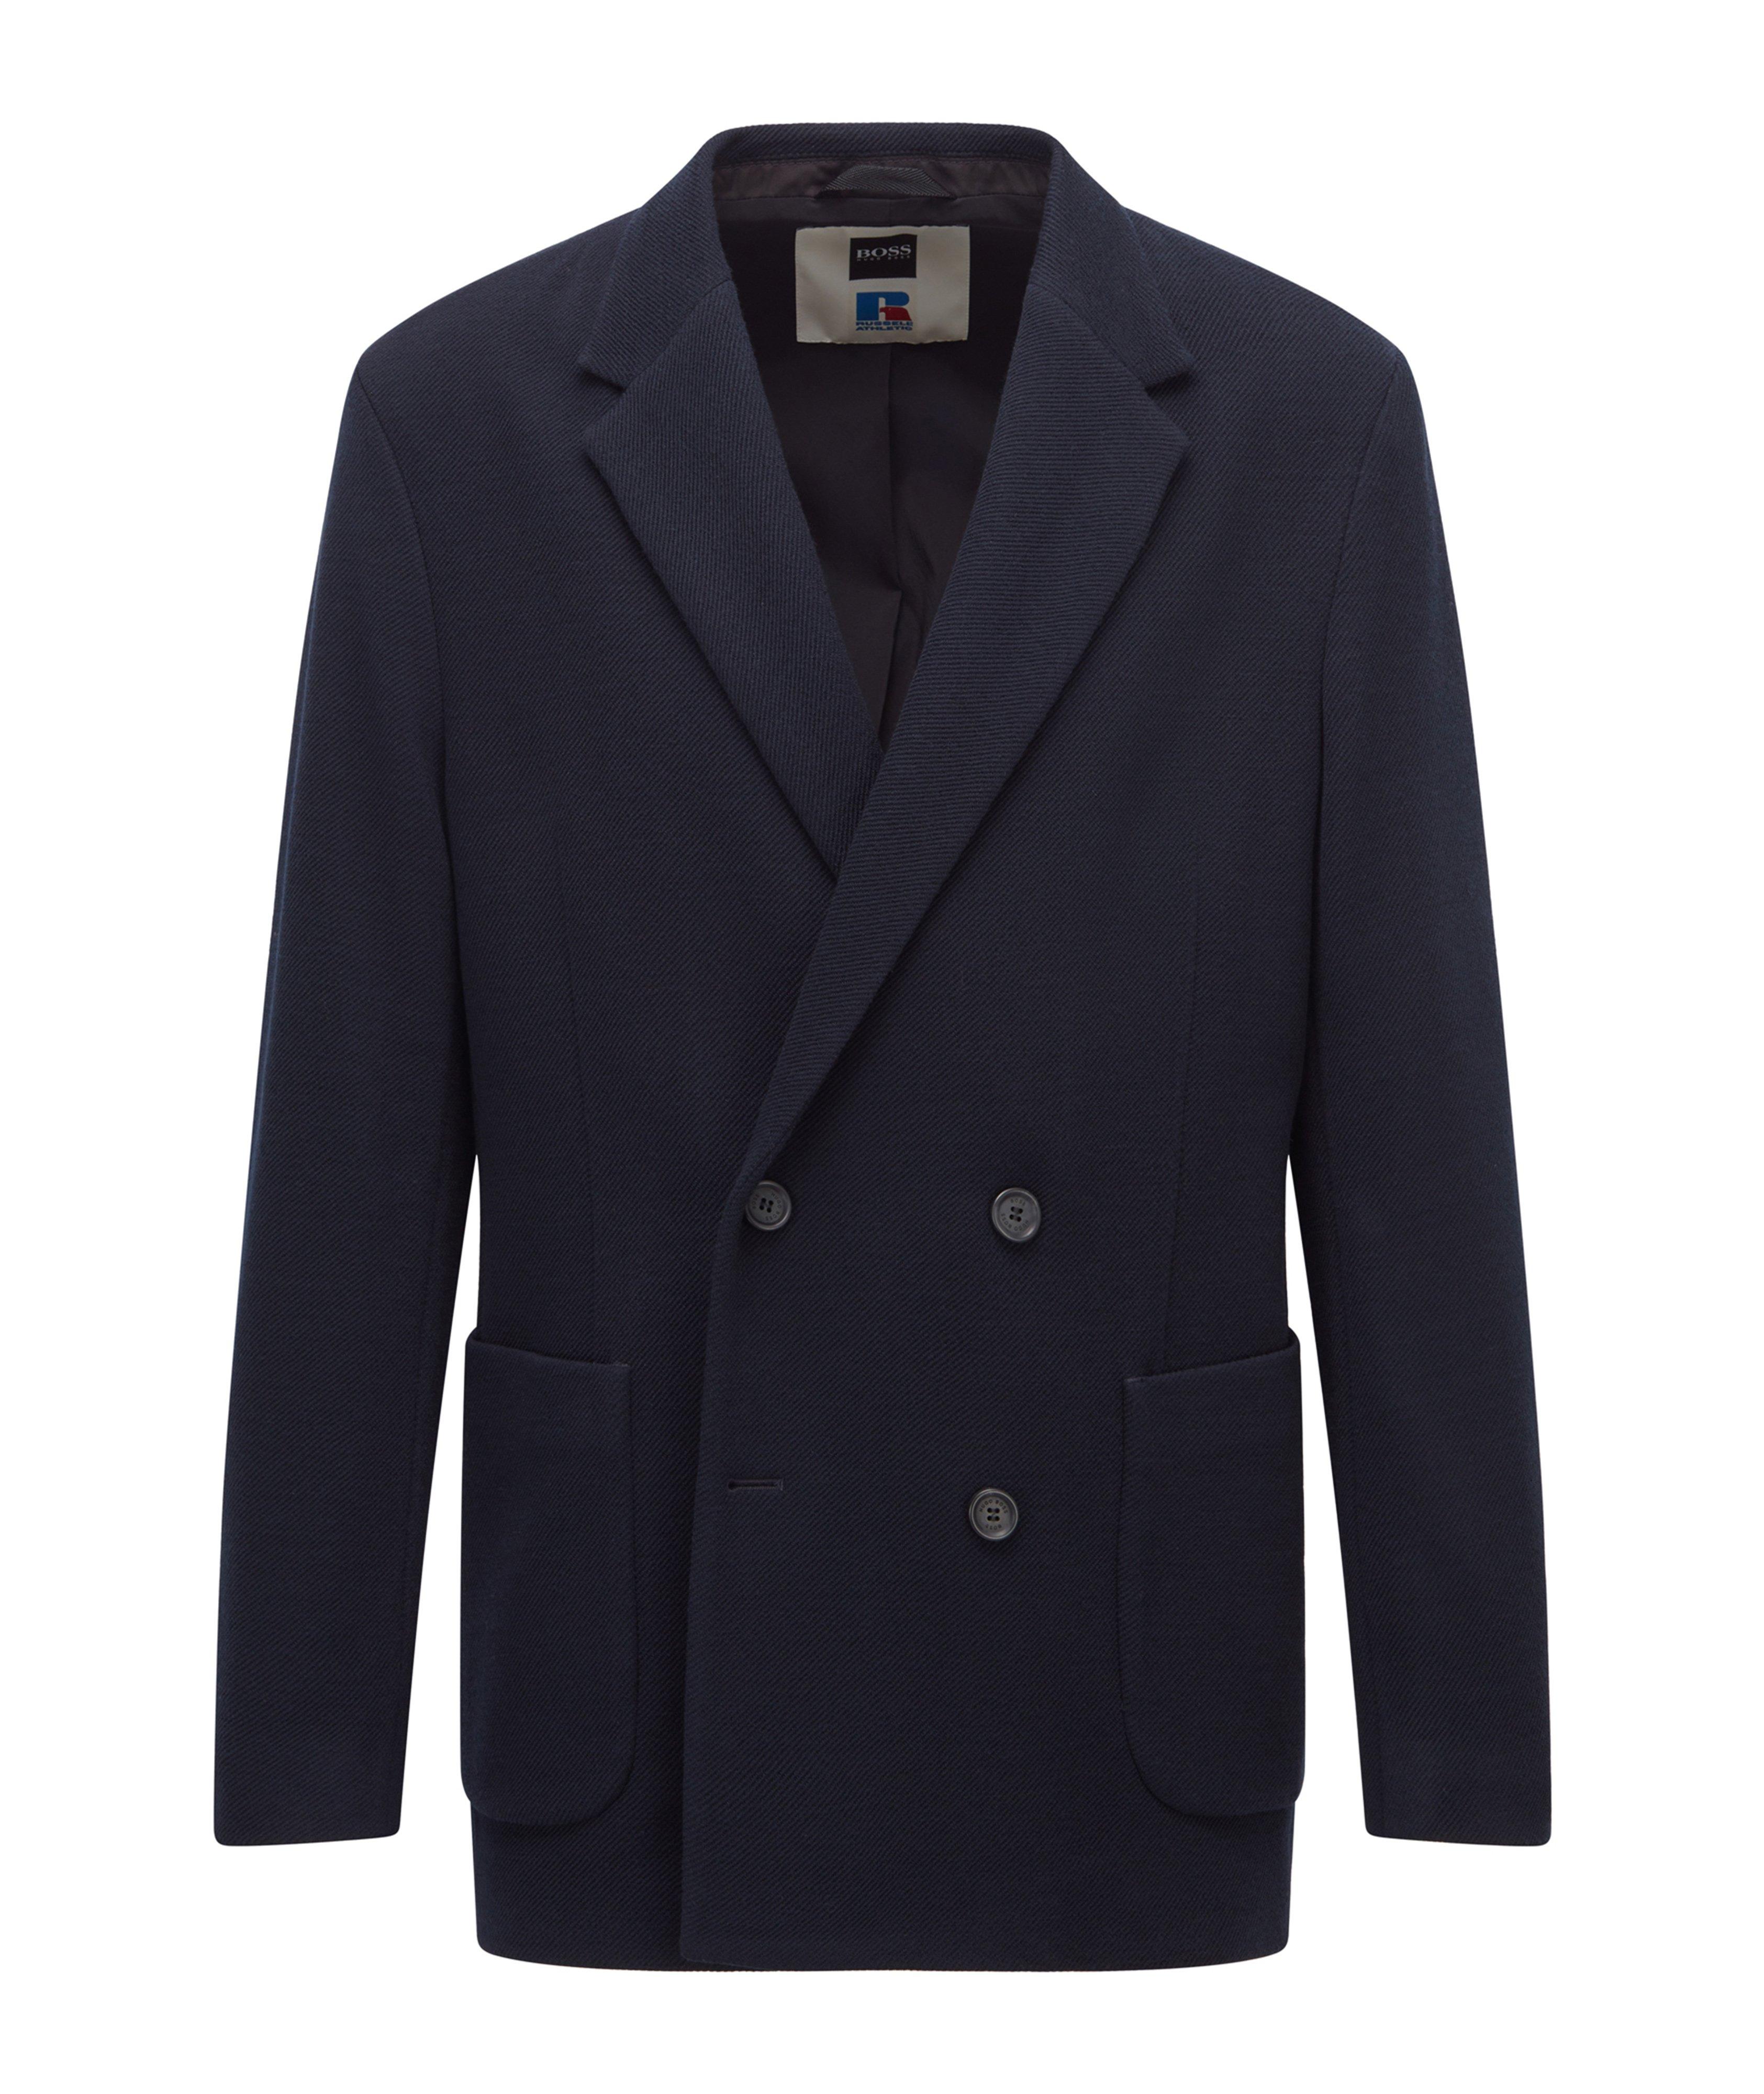 BOSS x Russell Athletic Wool-Blend Sport Jacket image 0